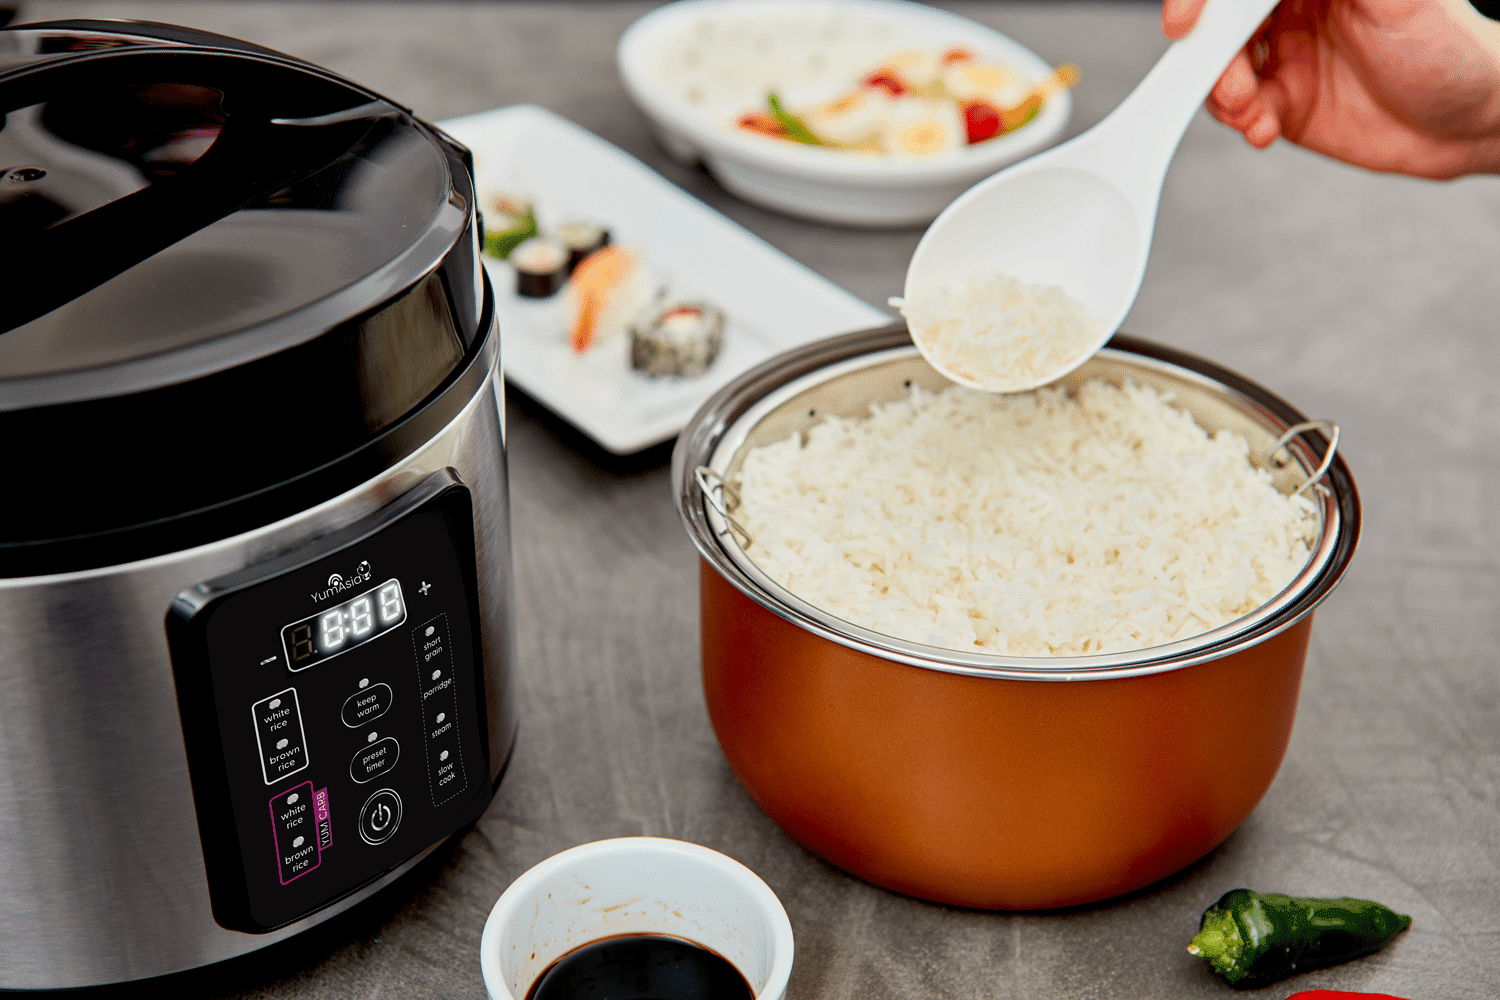 Fast Free Shipping and Returns The different types of rice cookers